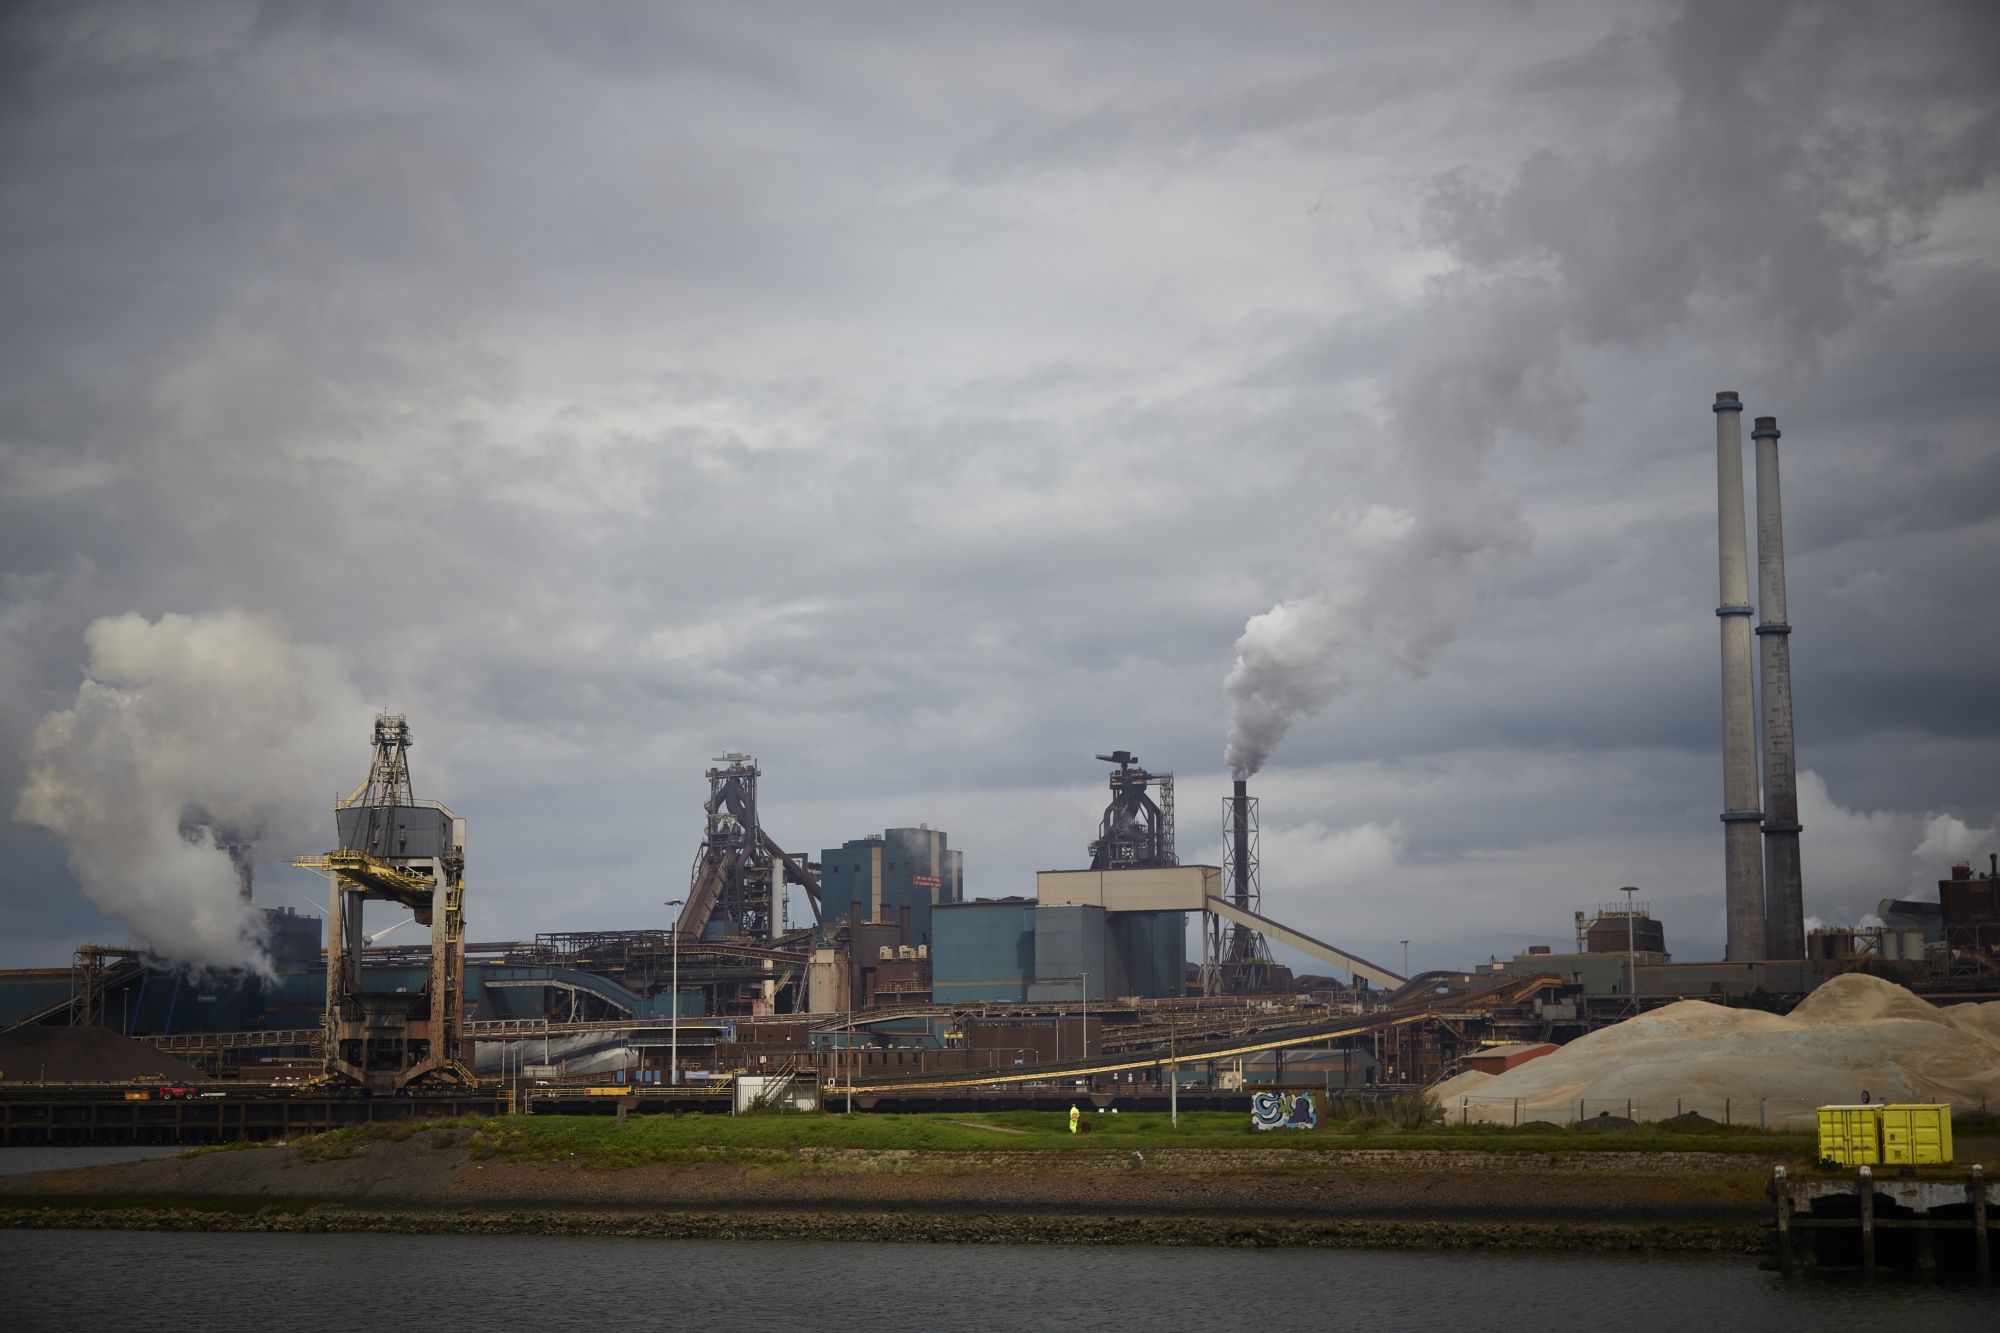 Tata Steel releases business updates on its worldwide operations